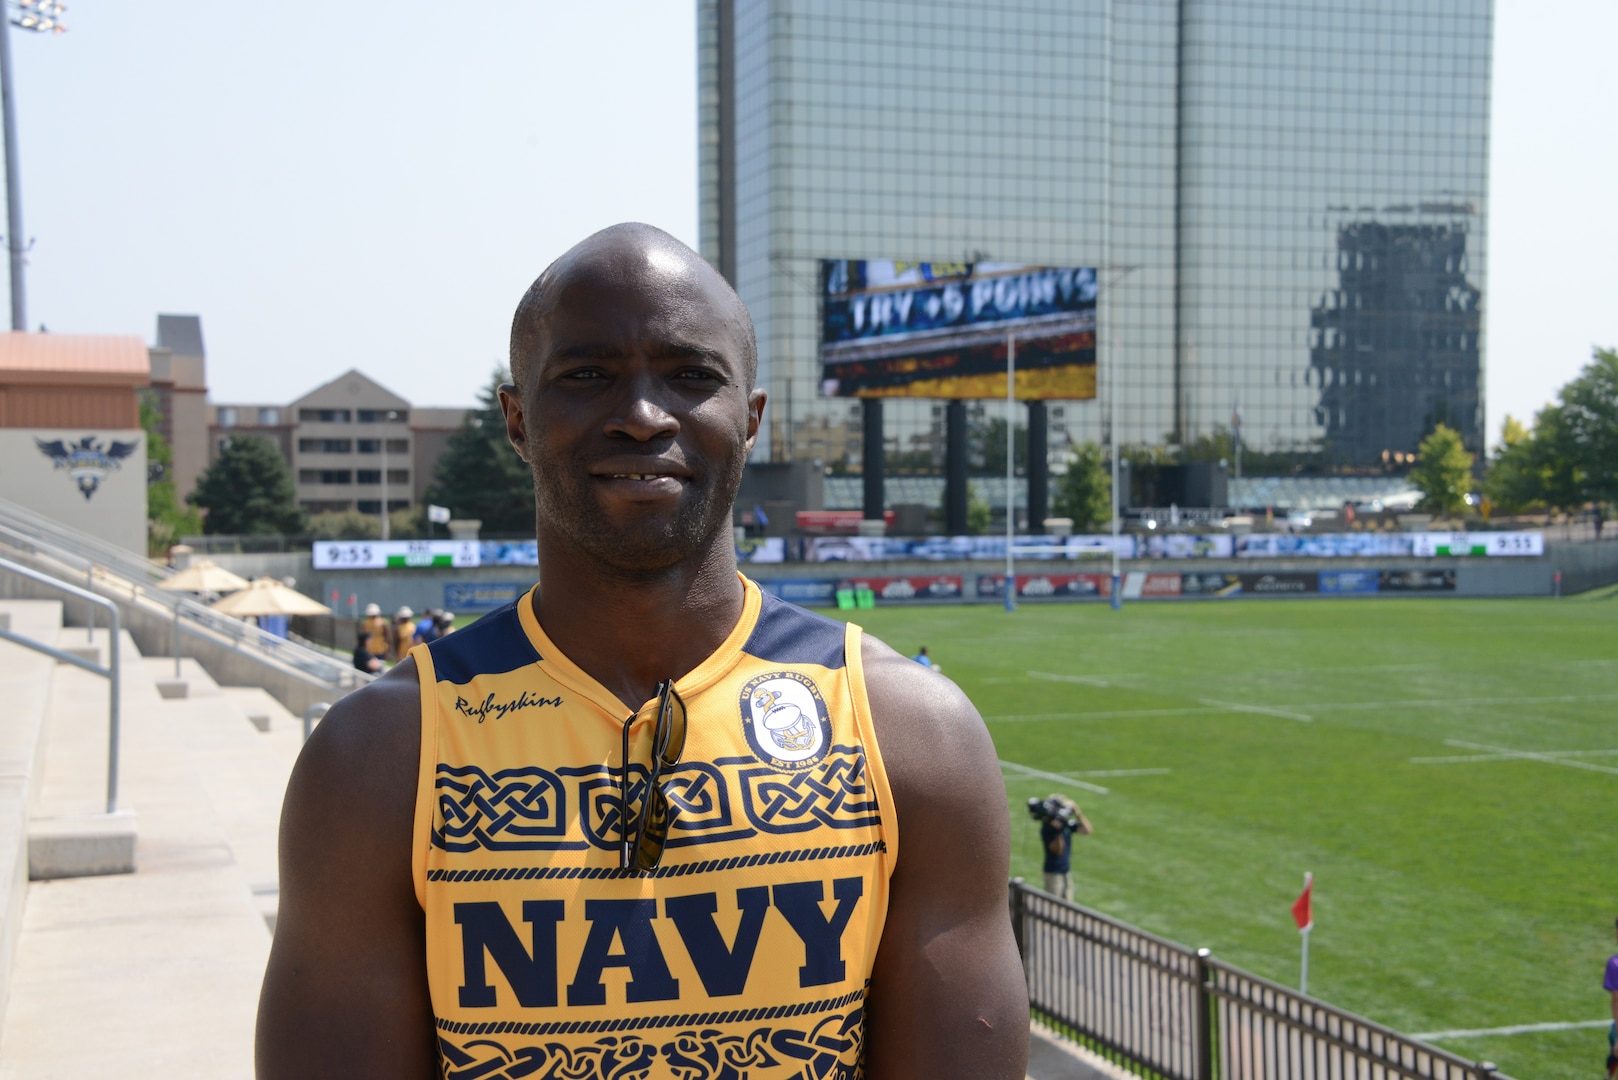 GLENDALE, Colo. – Navy Hospital Corpsman Cyprian Shimenga of Portsmouth, Va. stands if front of the pitch at 2018 Armed Forces Rugby Sevens Championship at Infinity Park, home of Rugbytown USA (Glendale, Colo.), Aug. 24-26, 2018. All Five Service branches are represented individually to compete in the 7th annual head-to-head competition. U.S. Navy photo by Mass Communication Specialist 2nd Class Tyler Caswell (Released).